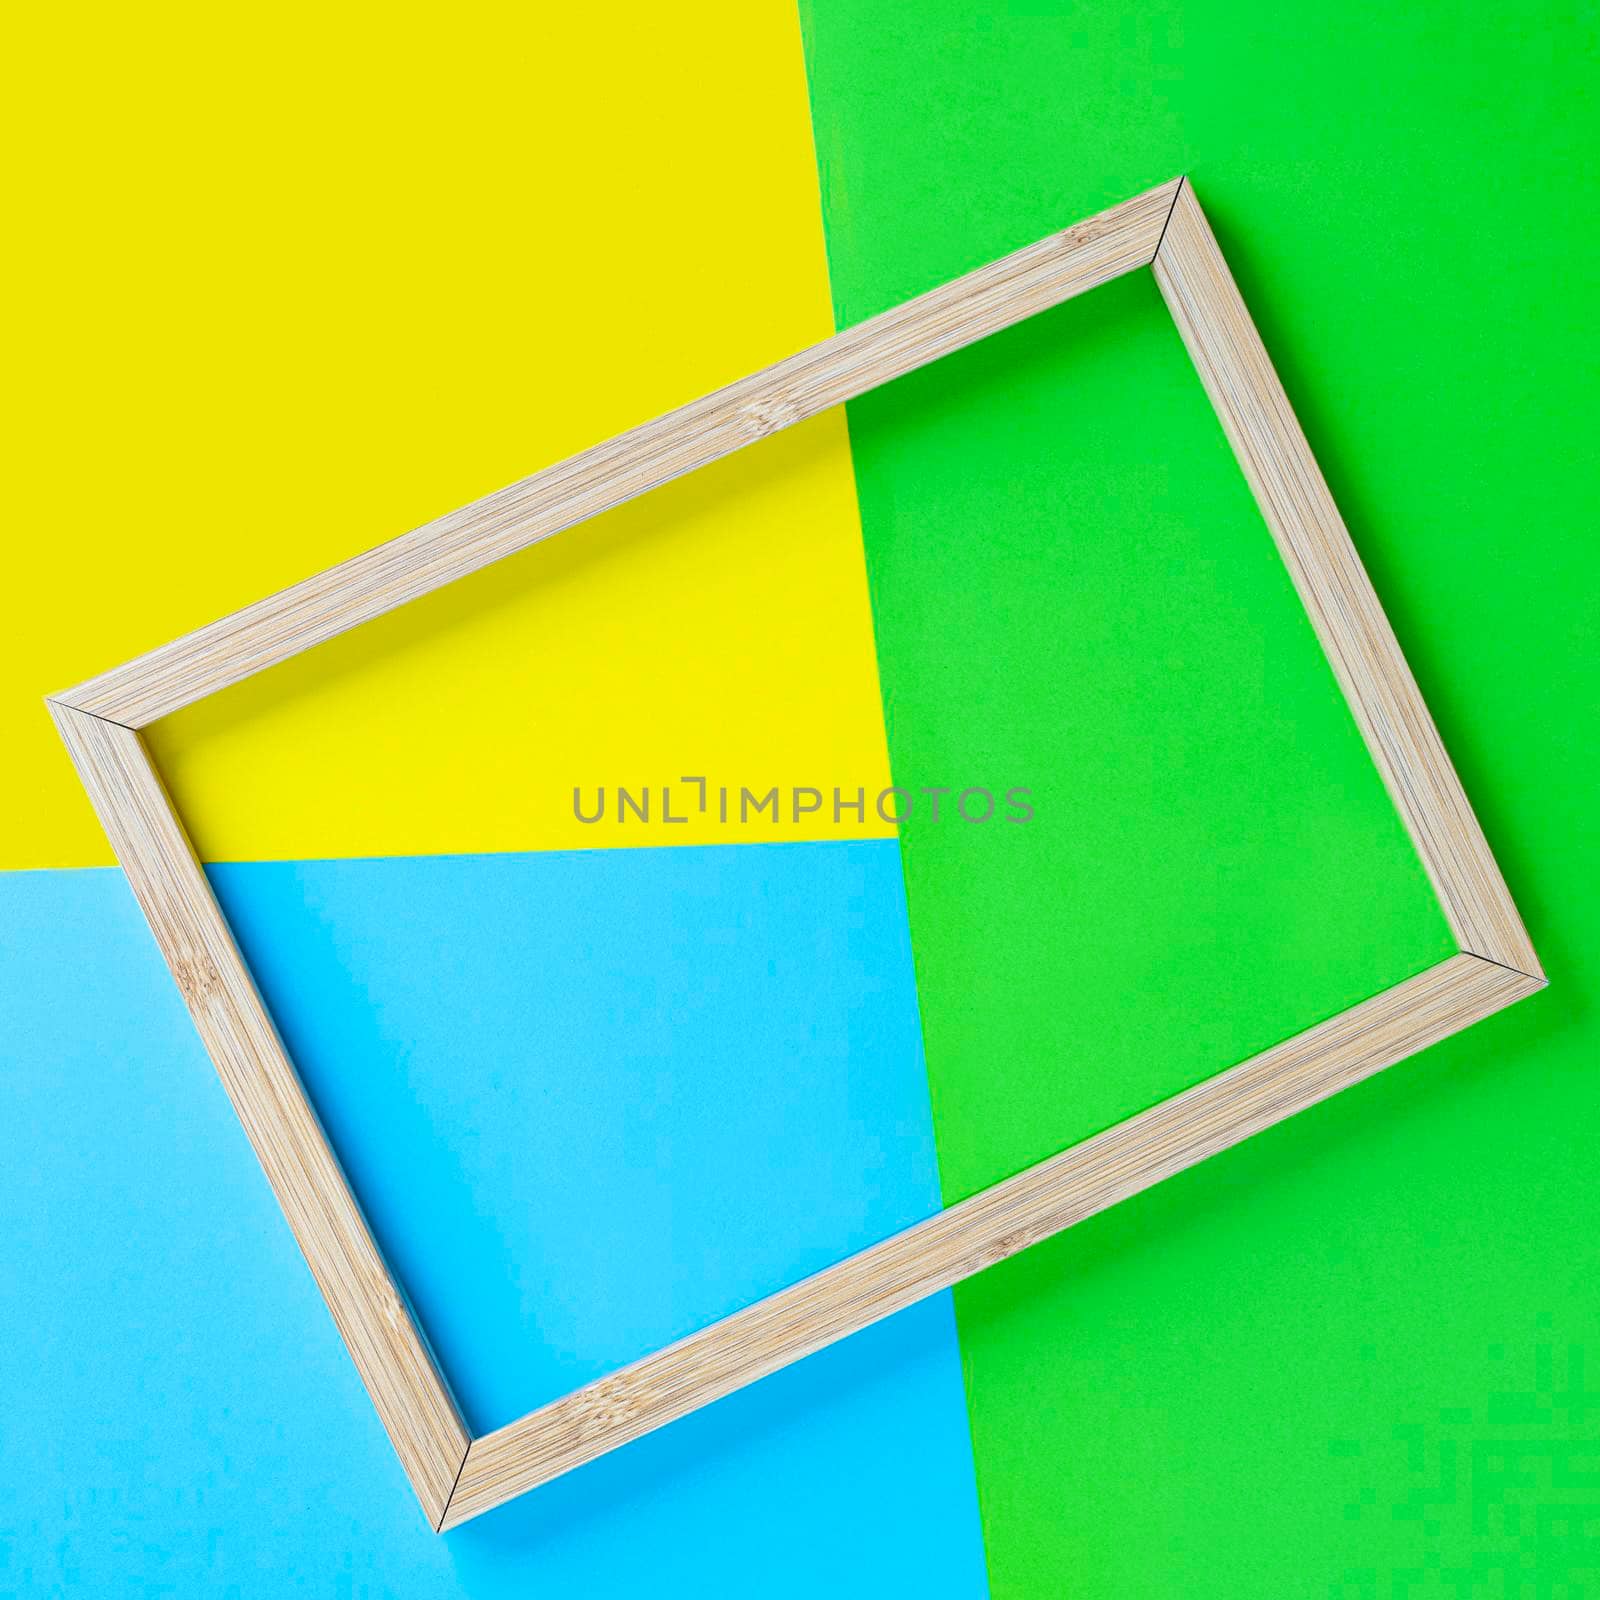 Colored shapes and frame by sergiodv